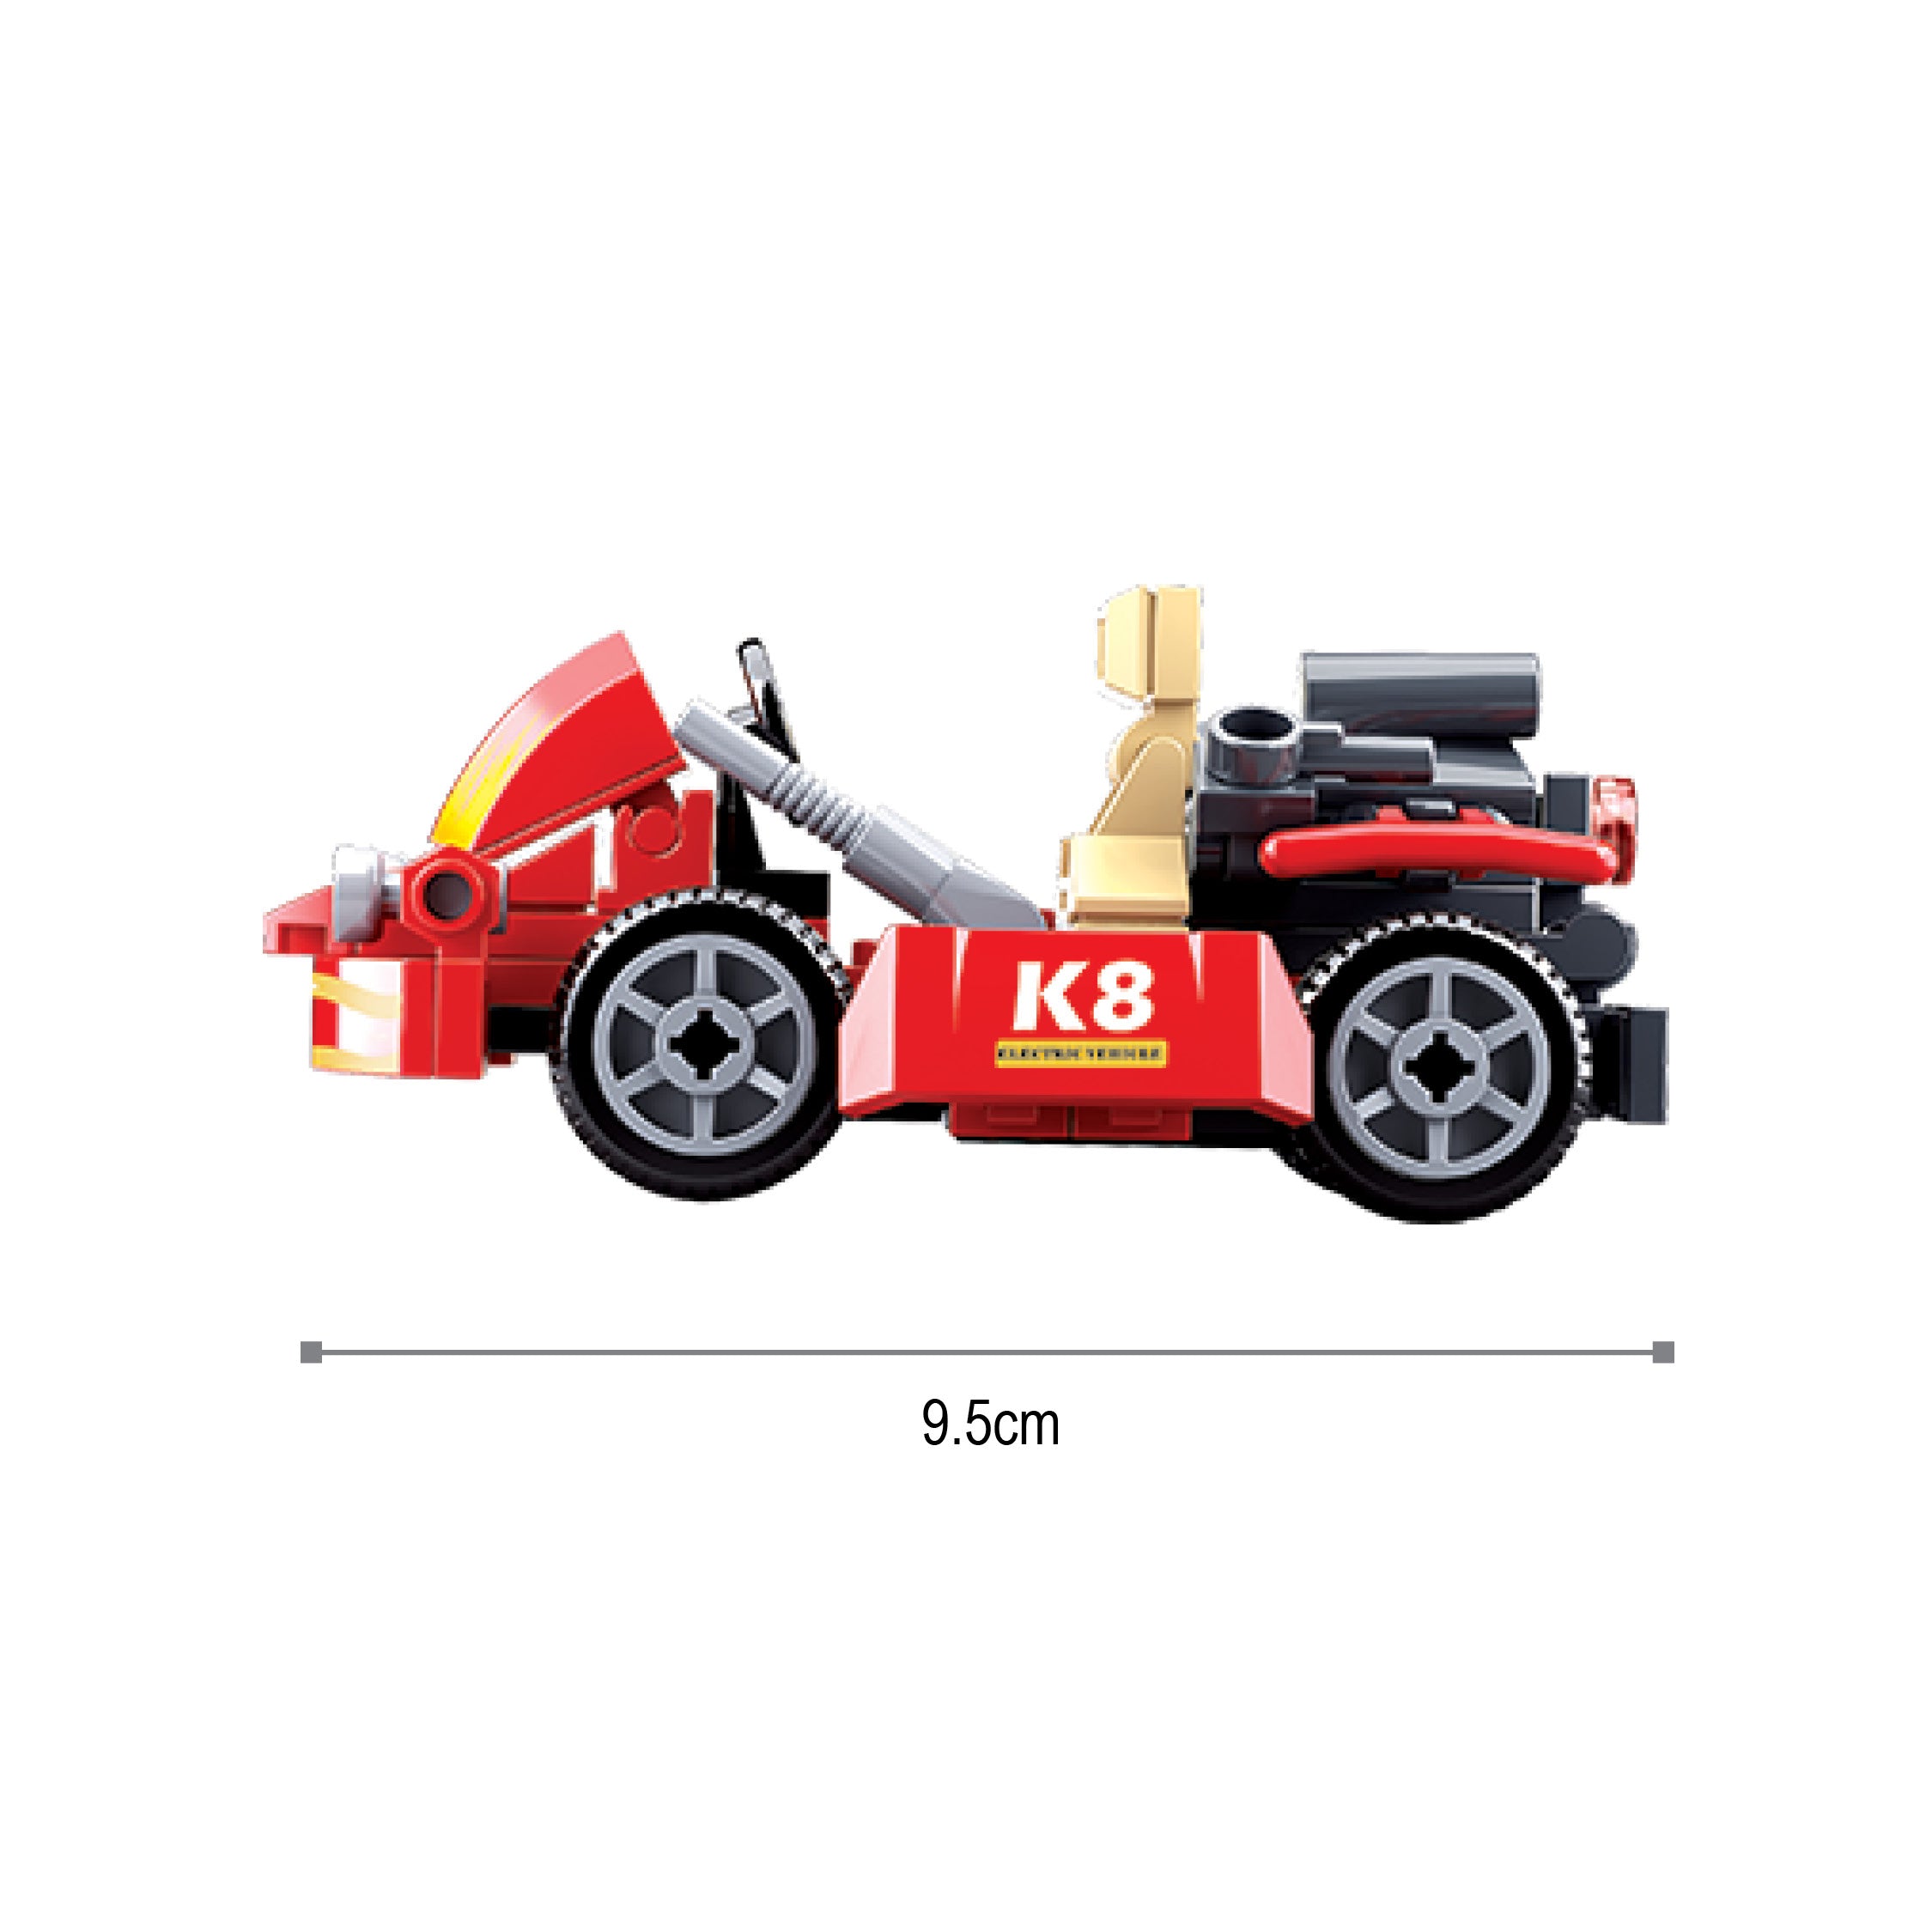 SLUBAN® KARTING (M38-B0899) (89 Pieces) Building Blocks Kit For Boys Aged 6 Years And Above Creative Construction Set Educational STEM Toy, Ideal For Gifting Birthday Gift Return Gift, Blocks Compatible With Other Leading Brands, BIS Certified.